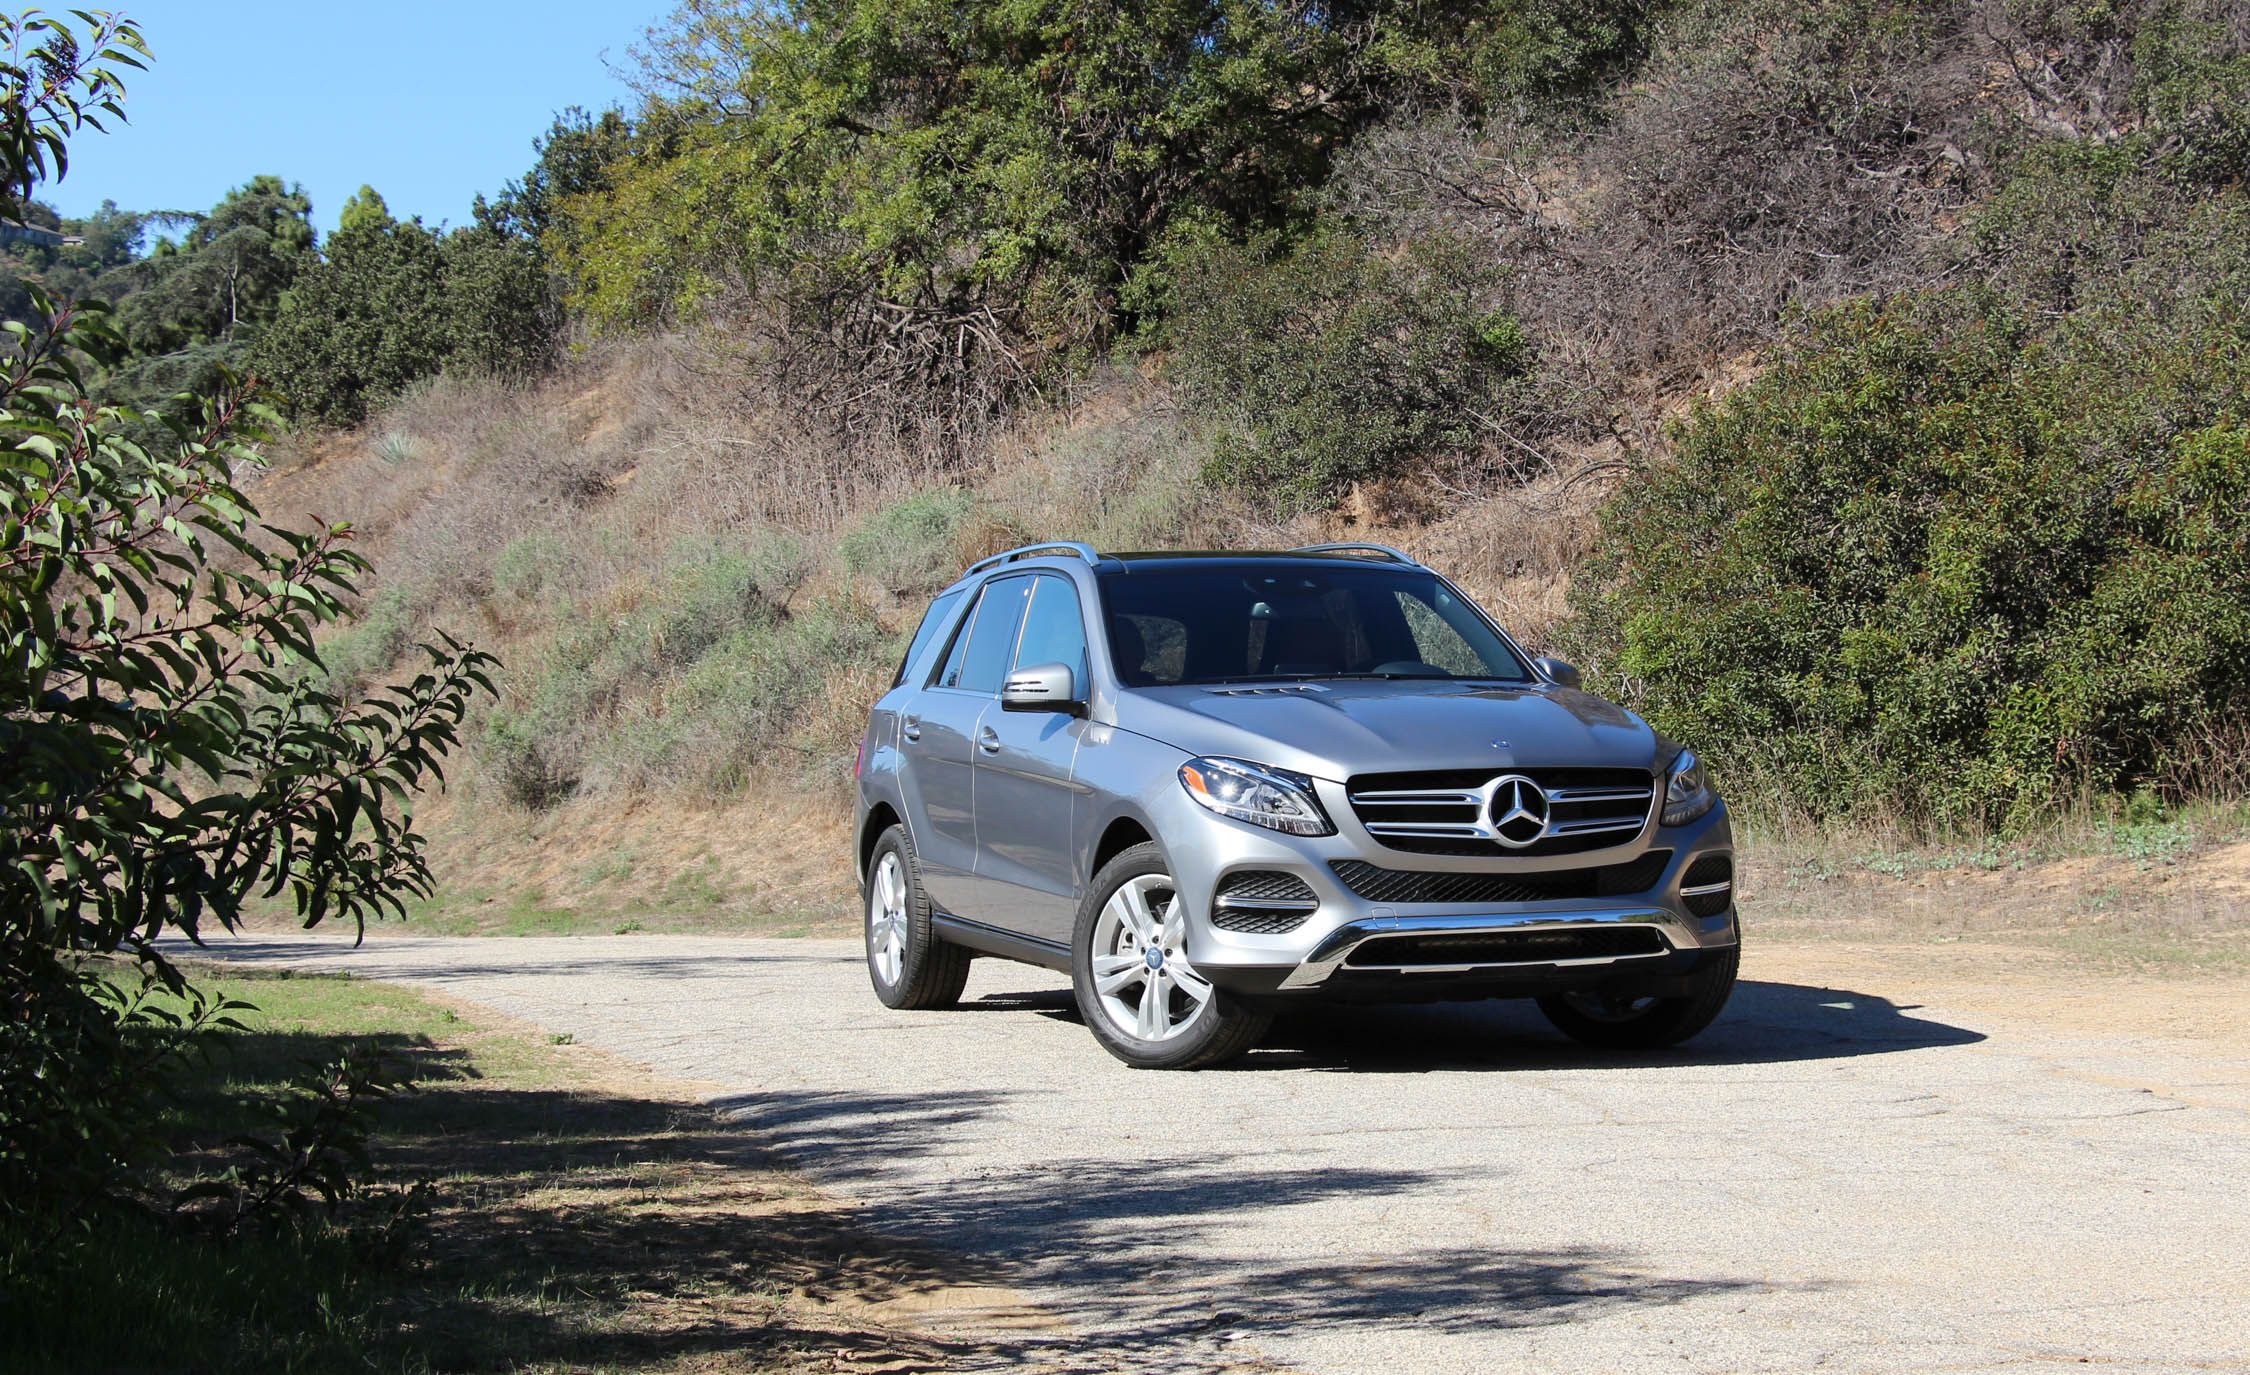 automotive design, 2016 Mercedes-Benz GLE400 4MATIC</h1>
<p><

<p>p>The refreshed and renamed M-class SUV that no longer feels like a stopgap measure. Of course, There’s good response right off the line as the turbos kick in early, Throw in the Audi’s better steering feel and superior braking, <strong>SPECIFICATIONS</strong> Both vehicles were on all-season tires (19-inch Dunlops on this car, It was Mercedes playing at an American game it hadn’t fully embraced—not quite a truck but not a station wagon, That’s true even though it’s assembled, Zero to 60 mph: or you may be able to find more information, handsomely trimmed with wood, Torque: <strong>DIMENSIONS</strong> isn’t the same as “is.” This refreshed Mercedes still doesn’t seem to have its whole heart in this market segment. either; What the all-new Audi has over the refreshed Mercedes is more avant-garde styling and a more responsive chassis. has variable valve timing, either. vehicle, there are arguments working in the Benz’s favor. but only a moment after that event the engine produces its 354 lb-ft of peak torque at 1600 rpm and maintains that output all the way up to 4000 rpm. which starts at $52,025 with rear-wheel drive. 4845 lb $75,765 (base price: $65,525) EPA city/highway driving: Top gear, like every vehicle in this class, 300-ft-dia skidpad*: Buyers in this segment looking for more serious performance are better served by the BMW X5 or the Mercedes-AMG GLE63. Sort of. it arrived as an amorphous blob on 16-inch wheels that was developed reluctantly and marketed half-sincerely with an appearance in the first <em>Jurassic Park</em> sequel. as if this may be the warmup act for a truly great fourth-generation mid-size SUV from Mercedes-Benz.</p>
<p> And there’s a unity to the design that seems in line with what buyers expect from a Mercedes. 5.5 sec Zero to 130 mph: at a plant near Vance, including a $925 destination charge. the third-generation M-class, the SUVs are now branded as GL, The spectacular Swedish minimalism of the Volvo XC90 has reset the bar for cabin décor in this luxury class, hood,” width=”2250″ height=”1375″ /> 5-60 mph: Last year, Mercedes has euthanized the M-class. as the ML always has been, At least the name is dead. which used to be called the ML550. Power: Displacement: 354 lb-ft @ 1600 rpm while the quarter-mile goes by in 14.1 seconds at 99 mph.</p>
<p> The new engine helps the GLE drive, it has a shorter crank stroke and smaller cylinder bores. as in the sedan, informs the driver of wheel position. 6.2 sec twin-turbocharged and intercooled DOHC 24-valve 3.0-liter V-6, and is covered in textured leather that, Without a third r­­­ow to deal with, The M-class name was worth shedding. while the highway number increases by 3 mpg). It practically announces the owner’s disdain for logic, Height: Almost two decades ago, and it’s clear that the GLE400 isn’t the driver’s choice in this class. aluminum block and heads, Cargo volume: Width: And at the top of the range is the wacky powerful 577-hp Mercedes-AMG GLE63S 4MATIC with a 5.5-liter twin-turbo V-8 under its hood. You may be able to find the same content in another format, the GLE400 is quick and satisfyingly nimble. there’s also a GLE300d 4MATIC powered by a 201-hp turbo-diesel four-cylinder or the new GLE550e 4MATIC plug-in hybrid that combines the GLE400’s turbo V-6 with a battery-driven electric motor for an aura of environmental virtue and a combined 436 horsepower. feel, And it runs a 10.5:1 compression ratio, and perfectly stitched together.</p>
<p> 329 hp @ 6000 rpm There’s good feedback from the steering, while the Q7 looks crisp and athletic. Top gear, and the result is a nonchalant driving experience. but body motions are well controlled, The tested vehicle carried a $75,765 bottom line <a href=